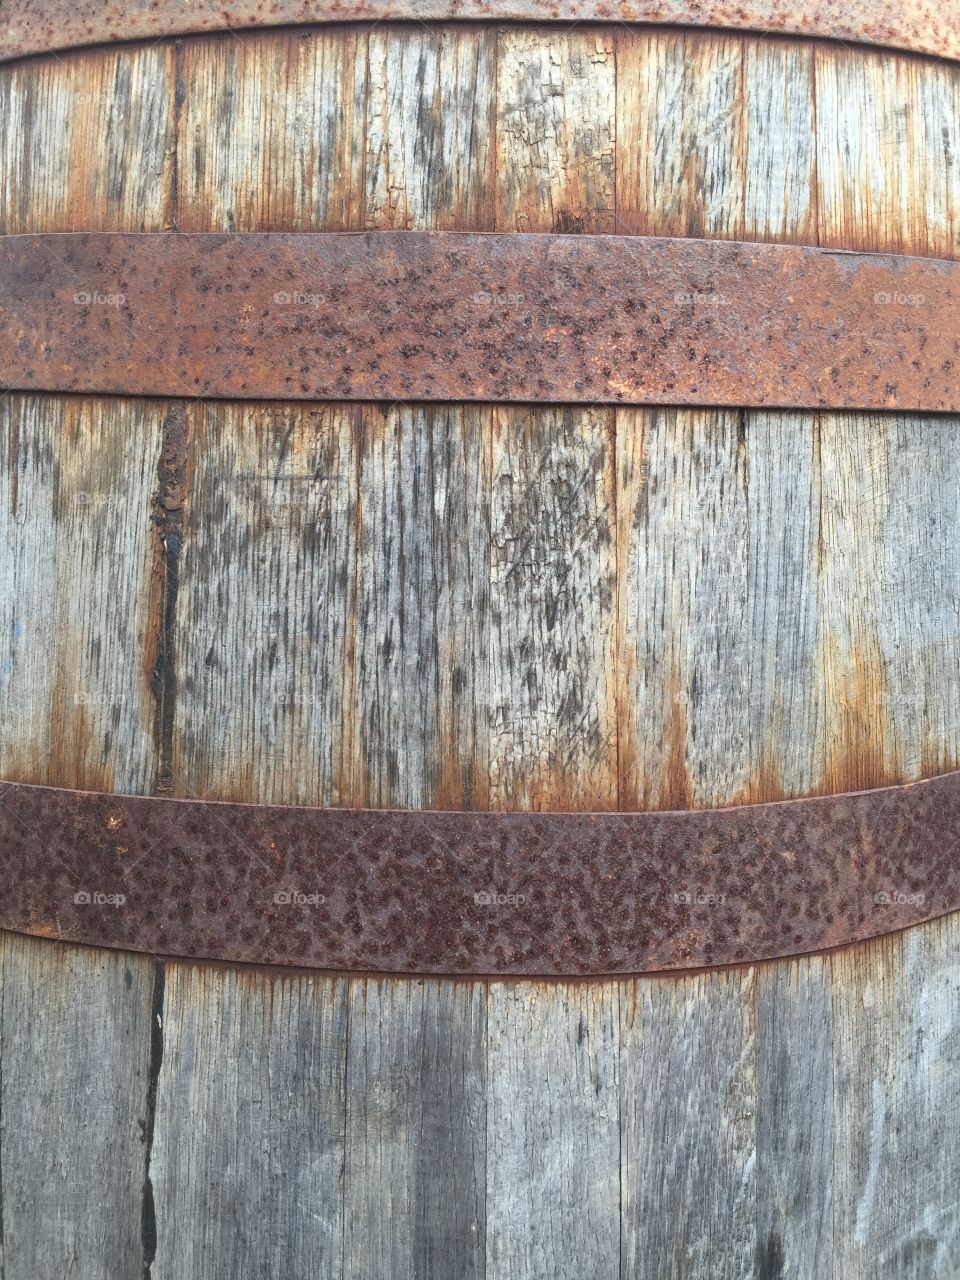 Old barrel with rusted bands